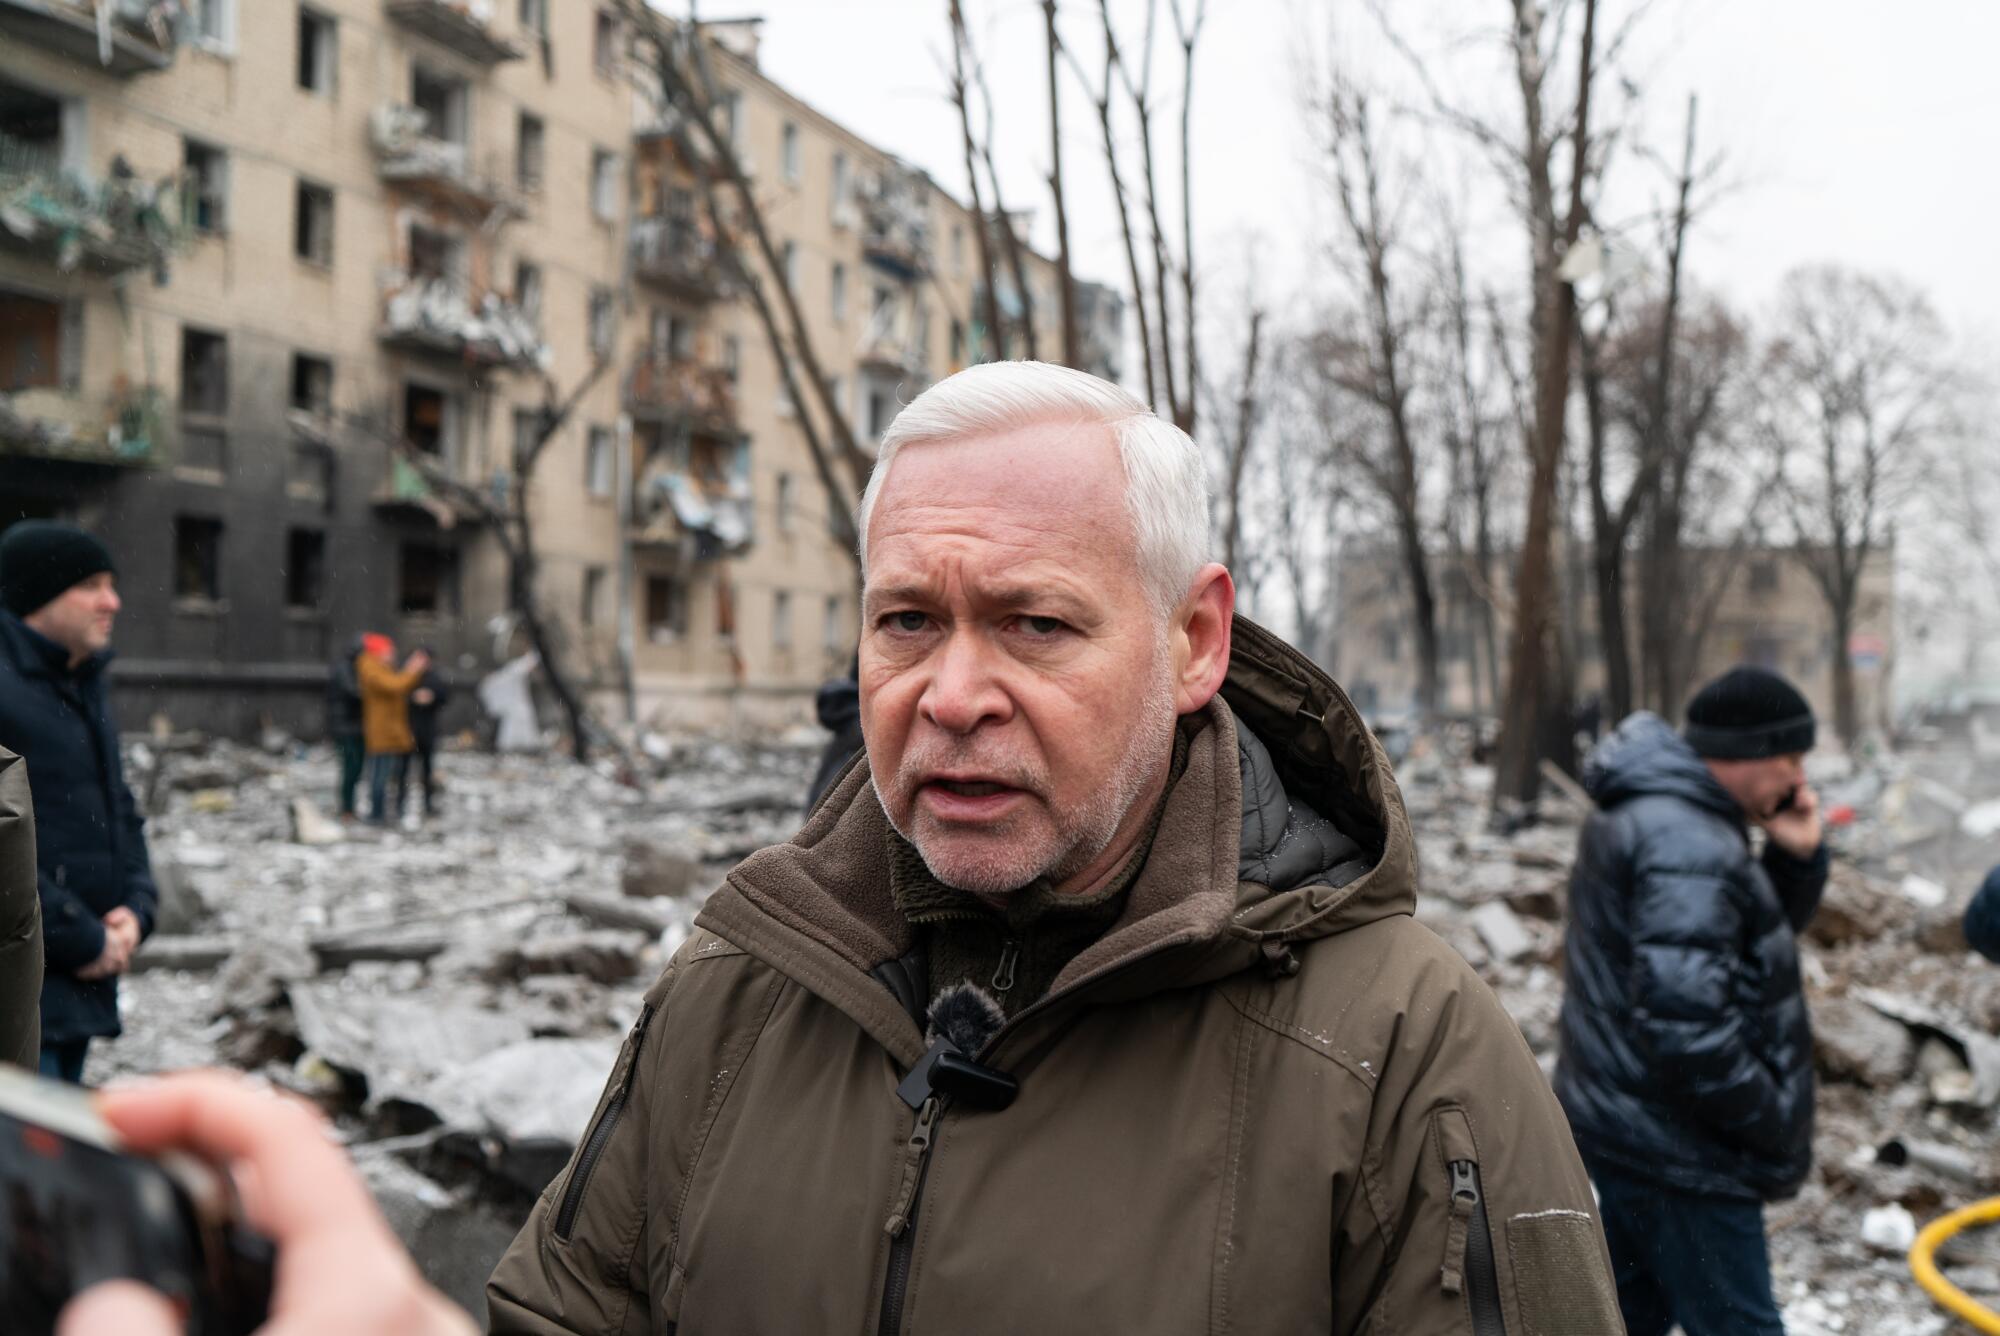 A man with gray hair, in a brown hooded jacket, with a damaged building bearing scorch marks in the background.